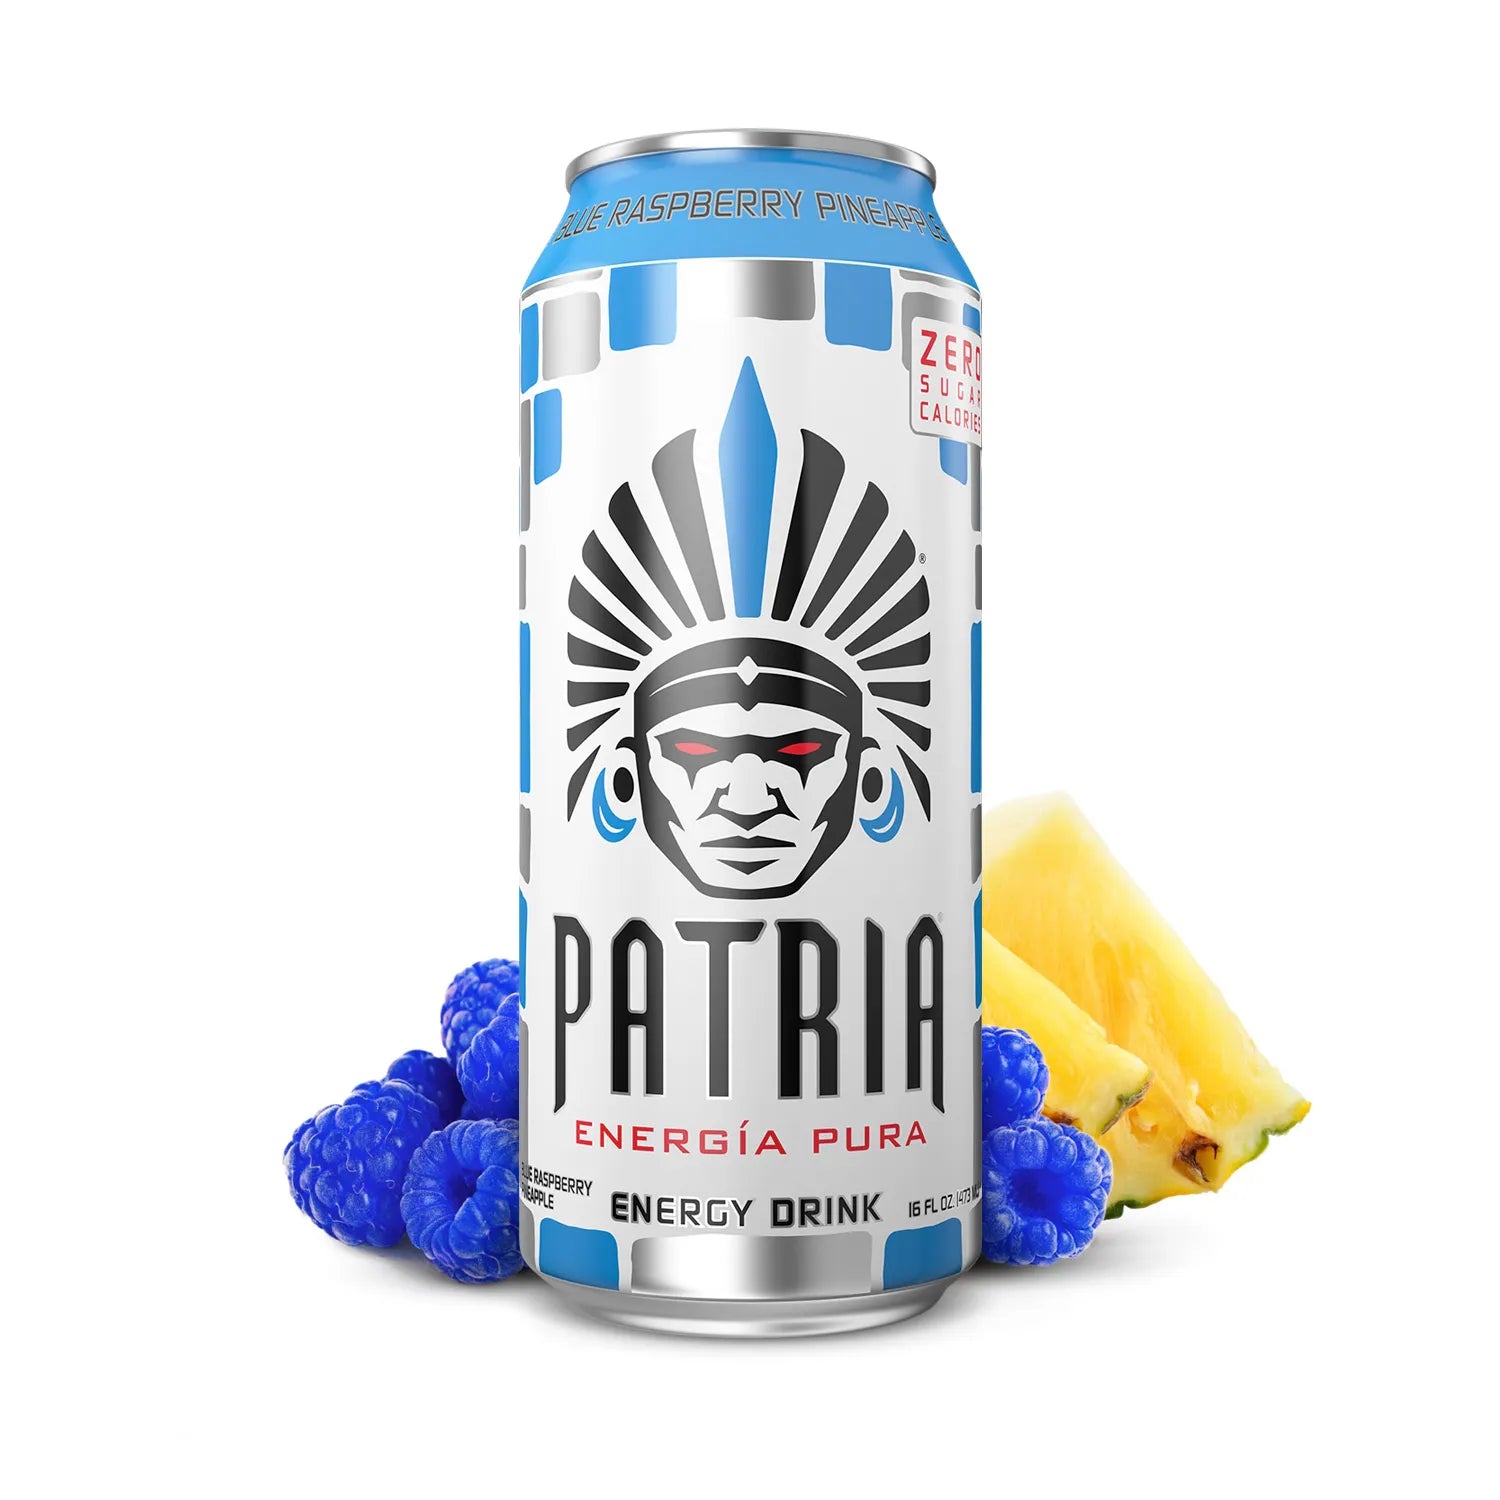 Patria Energy Drink - Blue Raspberry Pineapple - 16 oz Can (12 Pack Case)